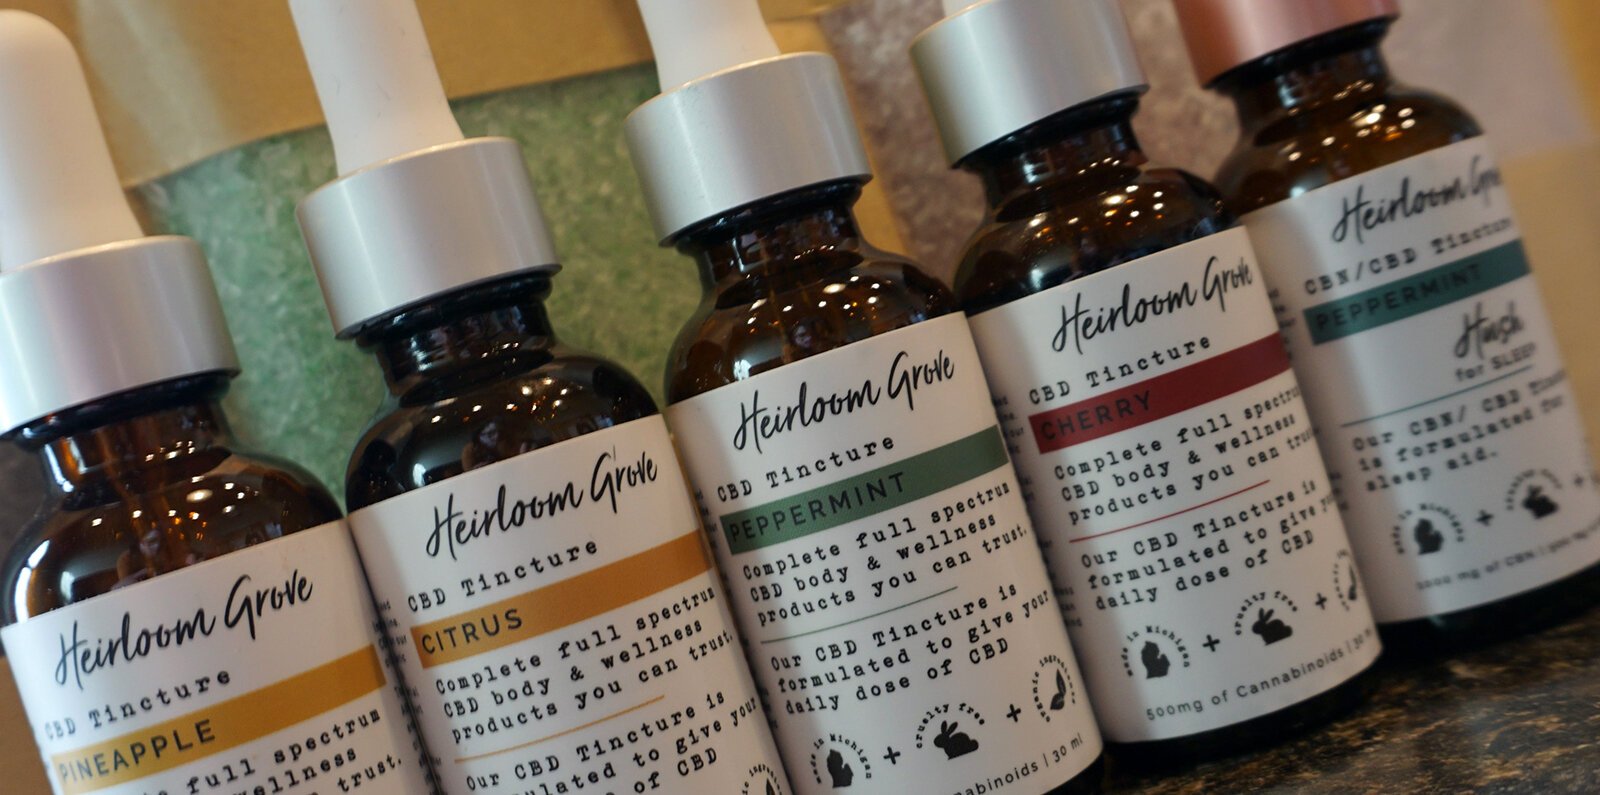 Craft Hemp Company sells a range of hemp products, including custom tinctures. Their hemp is sourced locally in Shepherd.